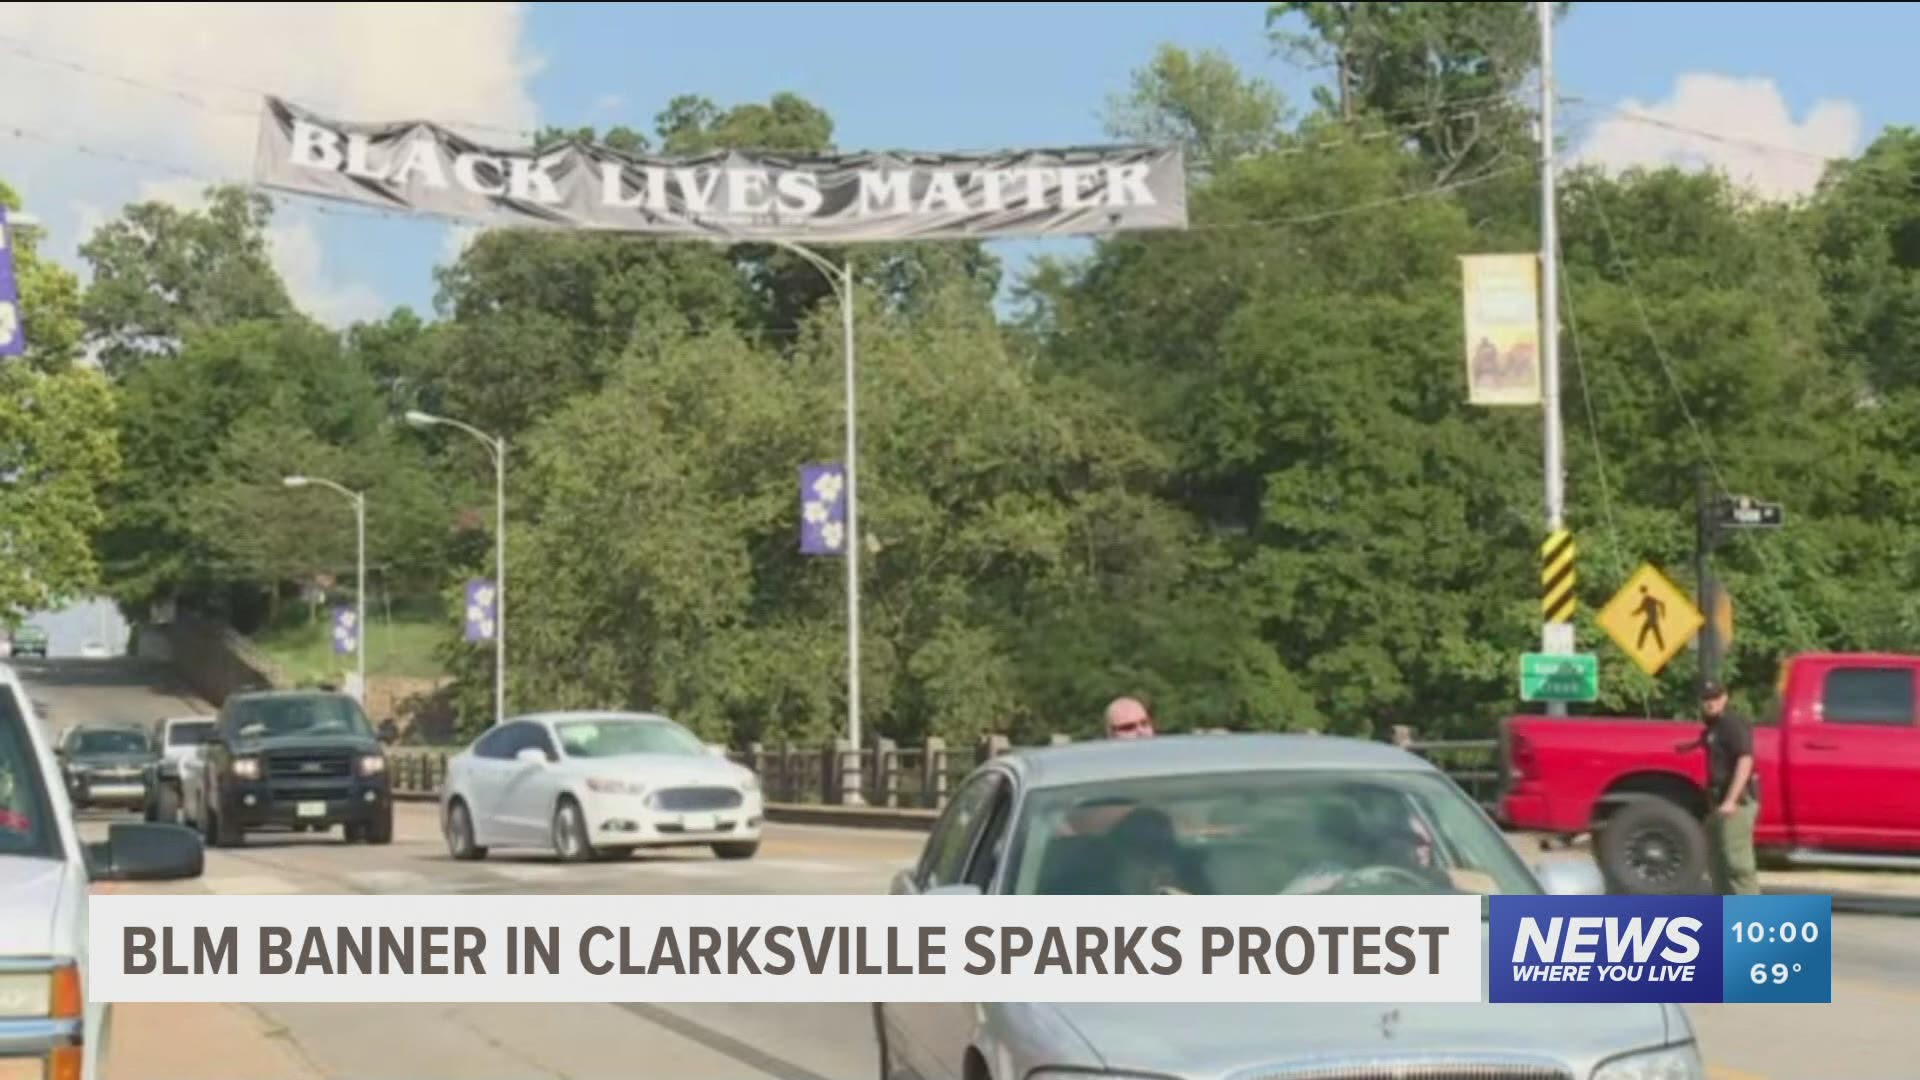 The banner was set in place ahead of a Black Lives Matter rally happening this September. https://bit.ly/2E6J7C4